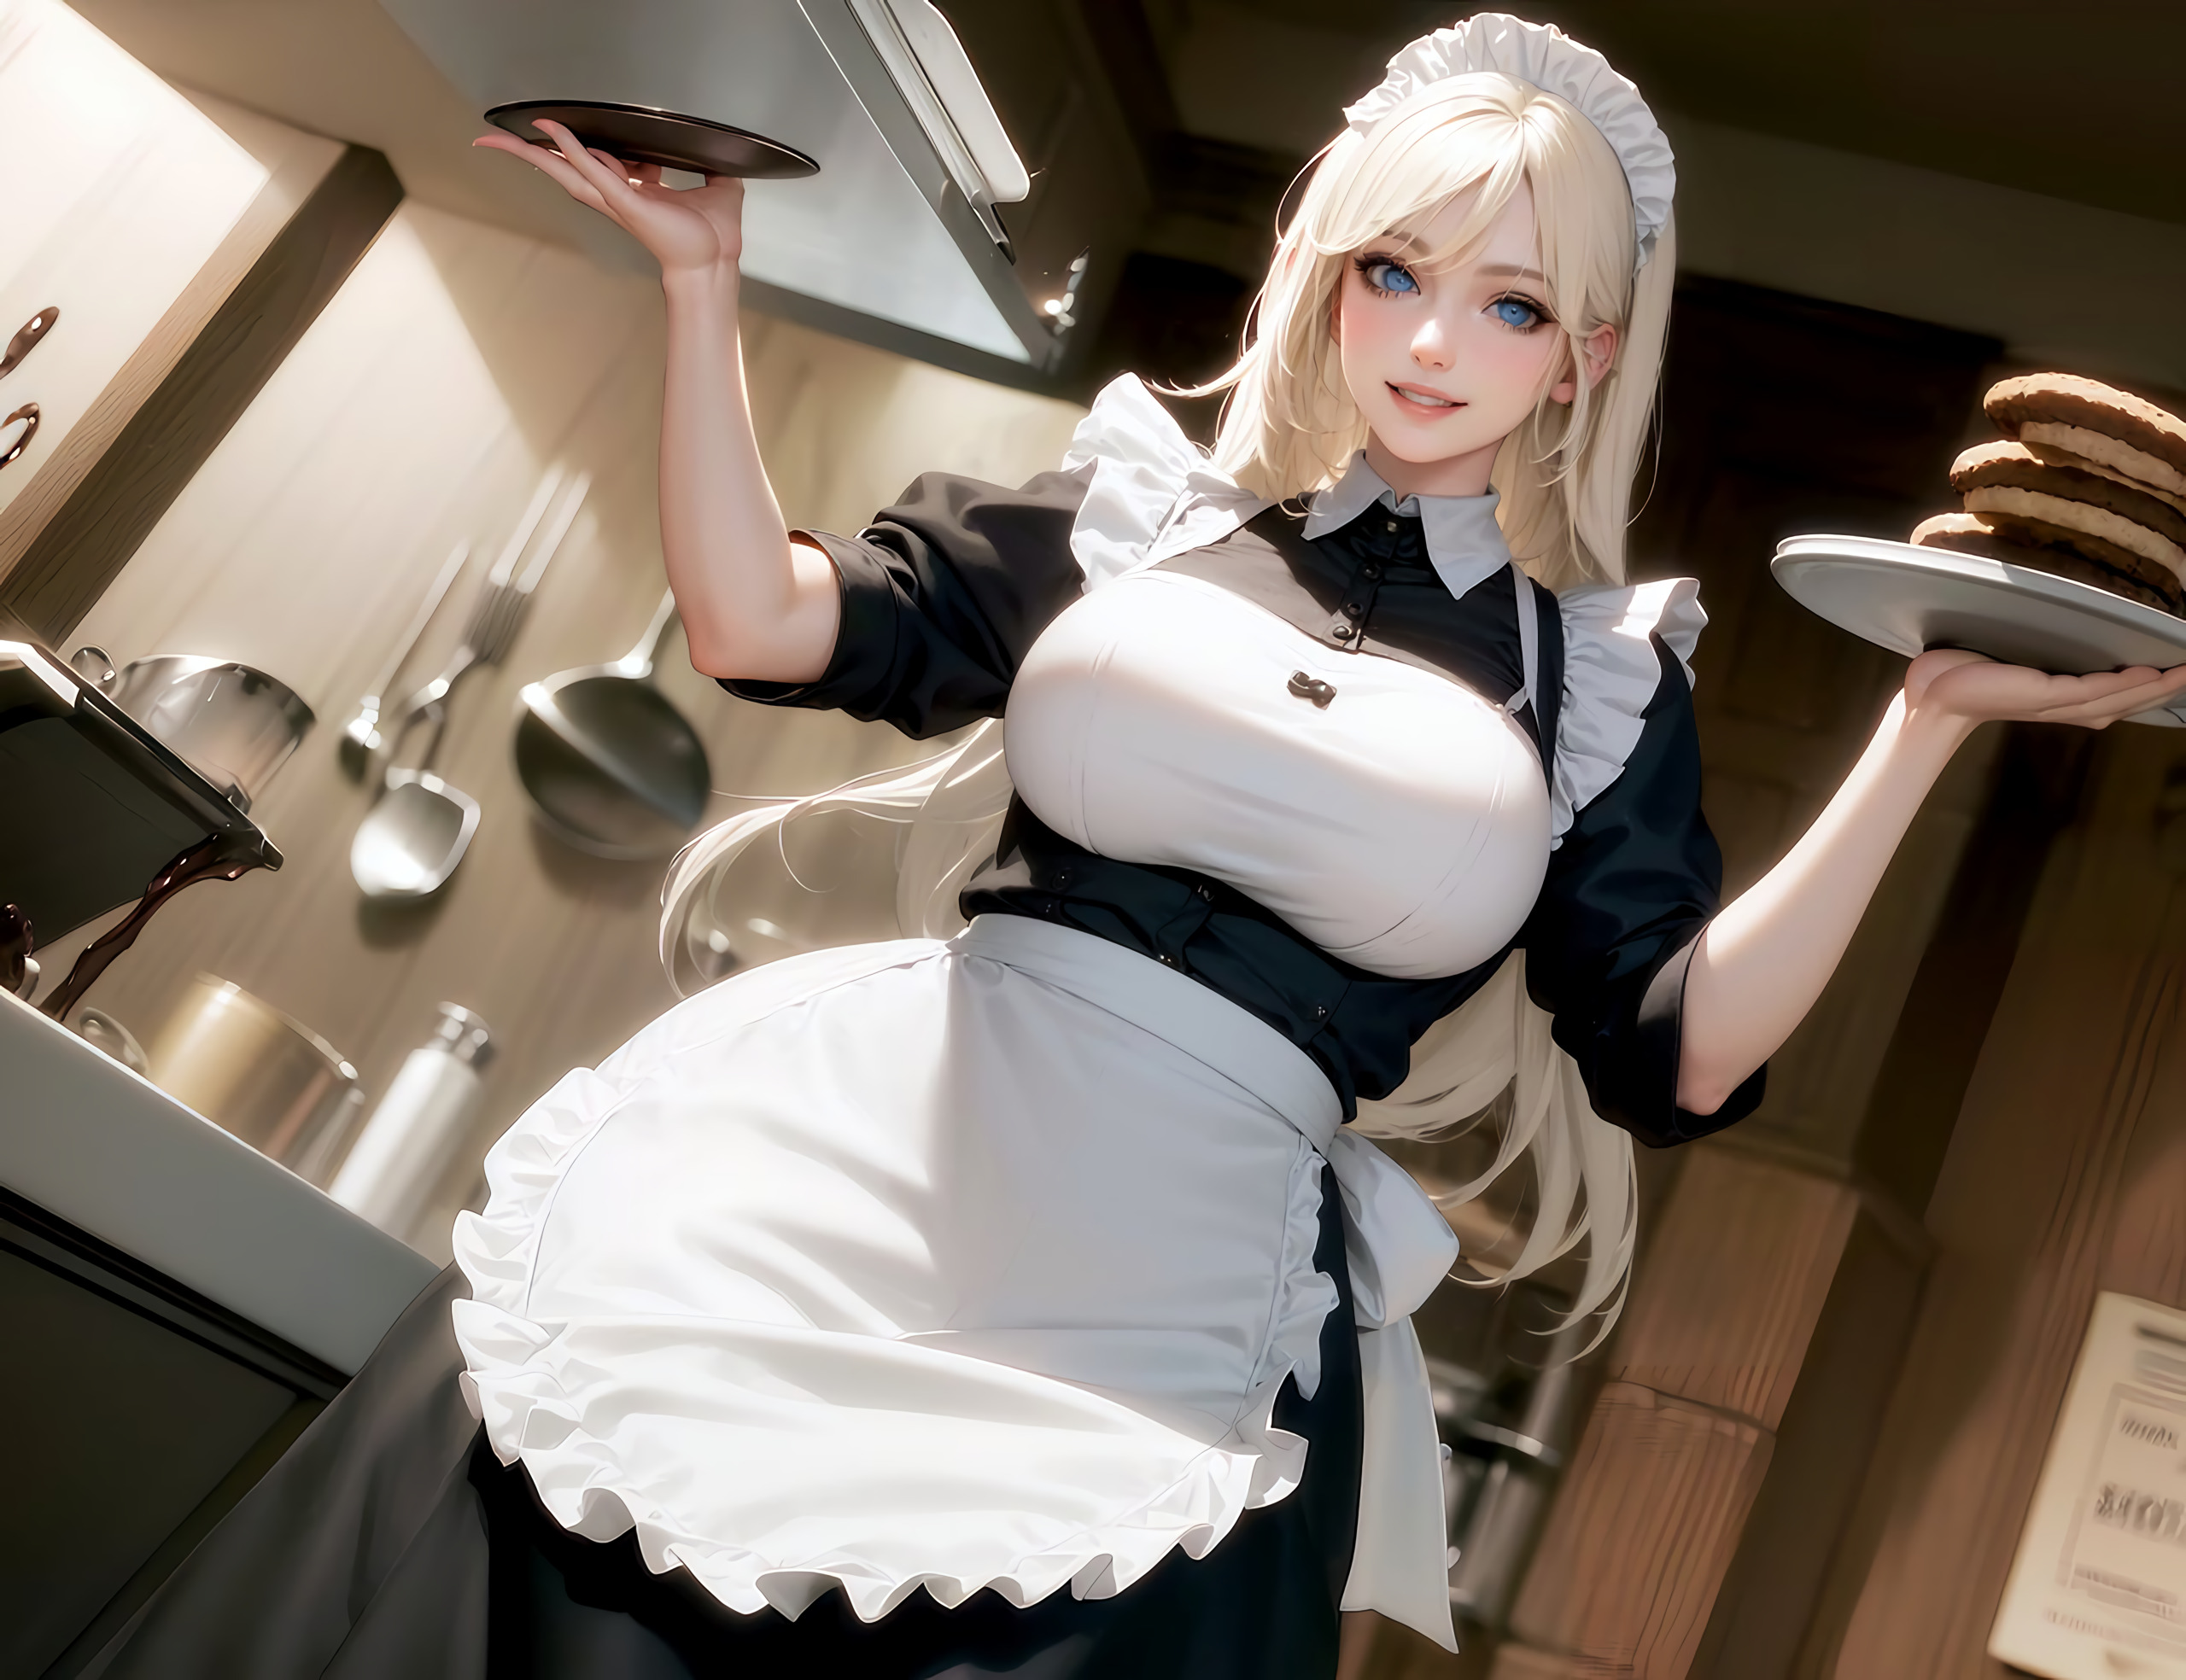 Stable Diffusion Ai Art Blonde Women Maid Outfit Maid Dress Kitchen Realistic Blue Eyes Smiling Apro 2560x1968